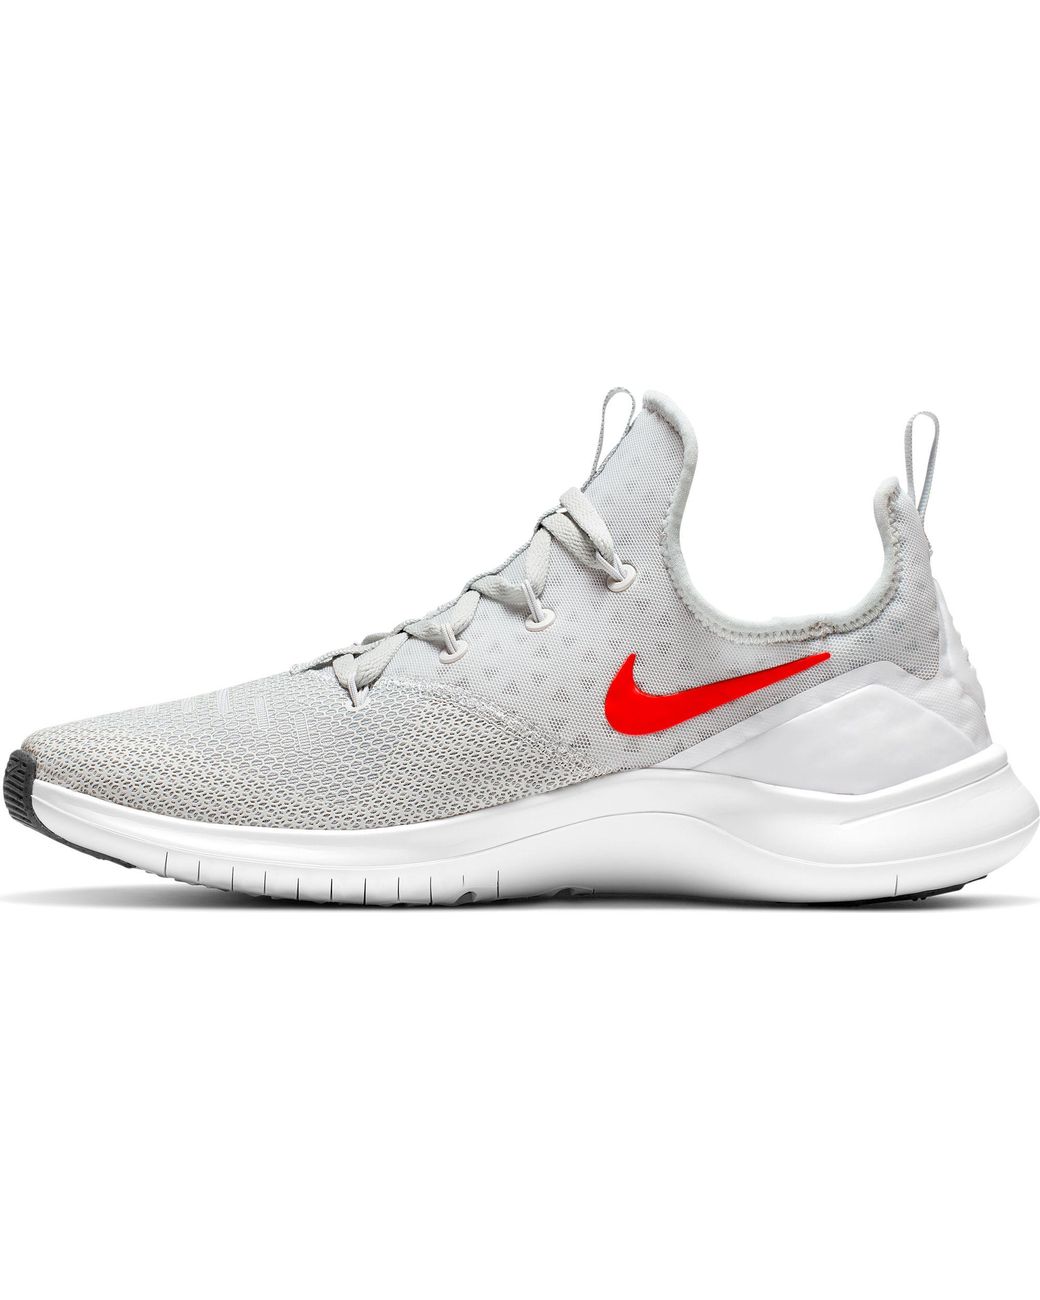 Nike Rubber Free Tr8 Training Shoes in 